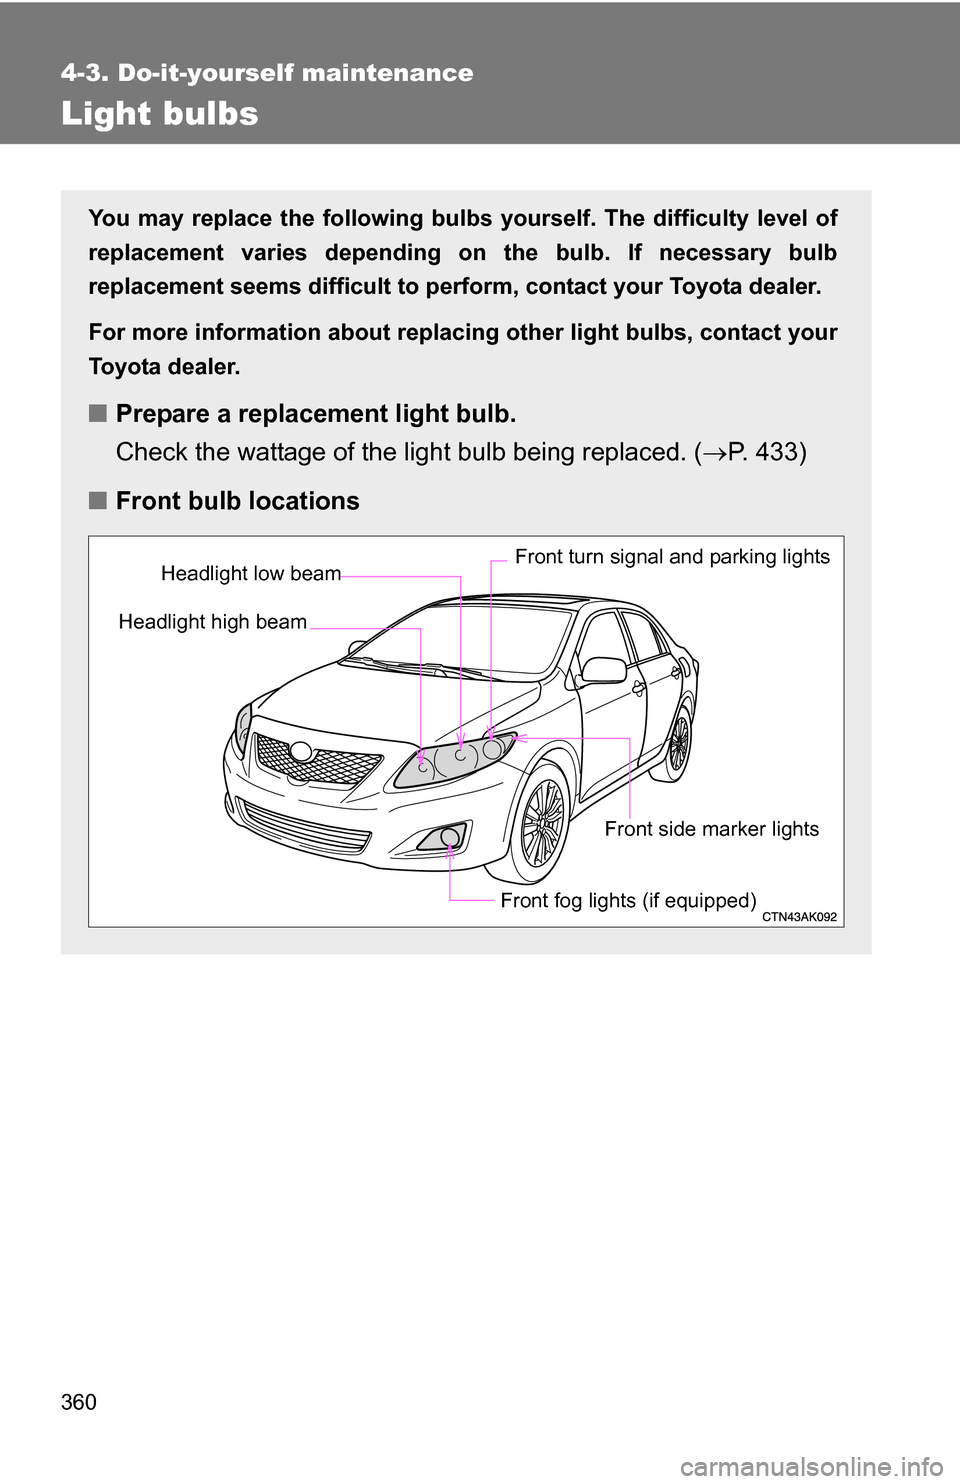 TOYOTA COROLLA 2010 10.G Owners Manual 360
4-3. Do-it-yourself maintenance
Light bulbs
You may replace the following bulbs yourself. The difficulty level of
replacement varies depending on the bulb. If necessary bulb
replacement seems diff